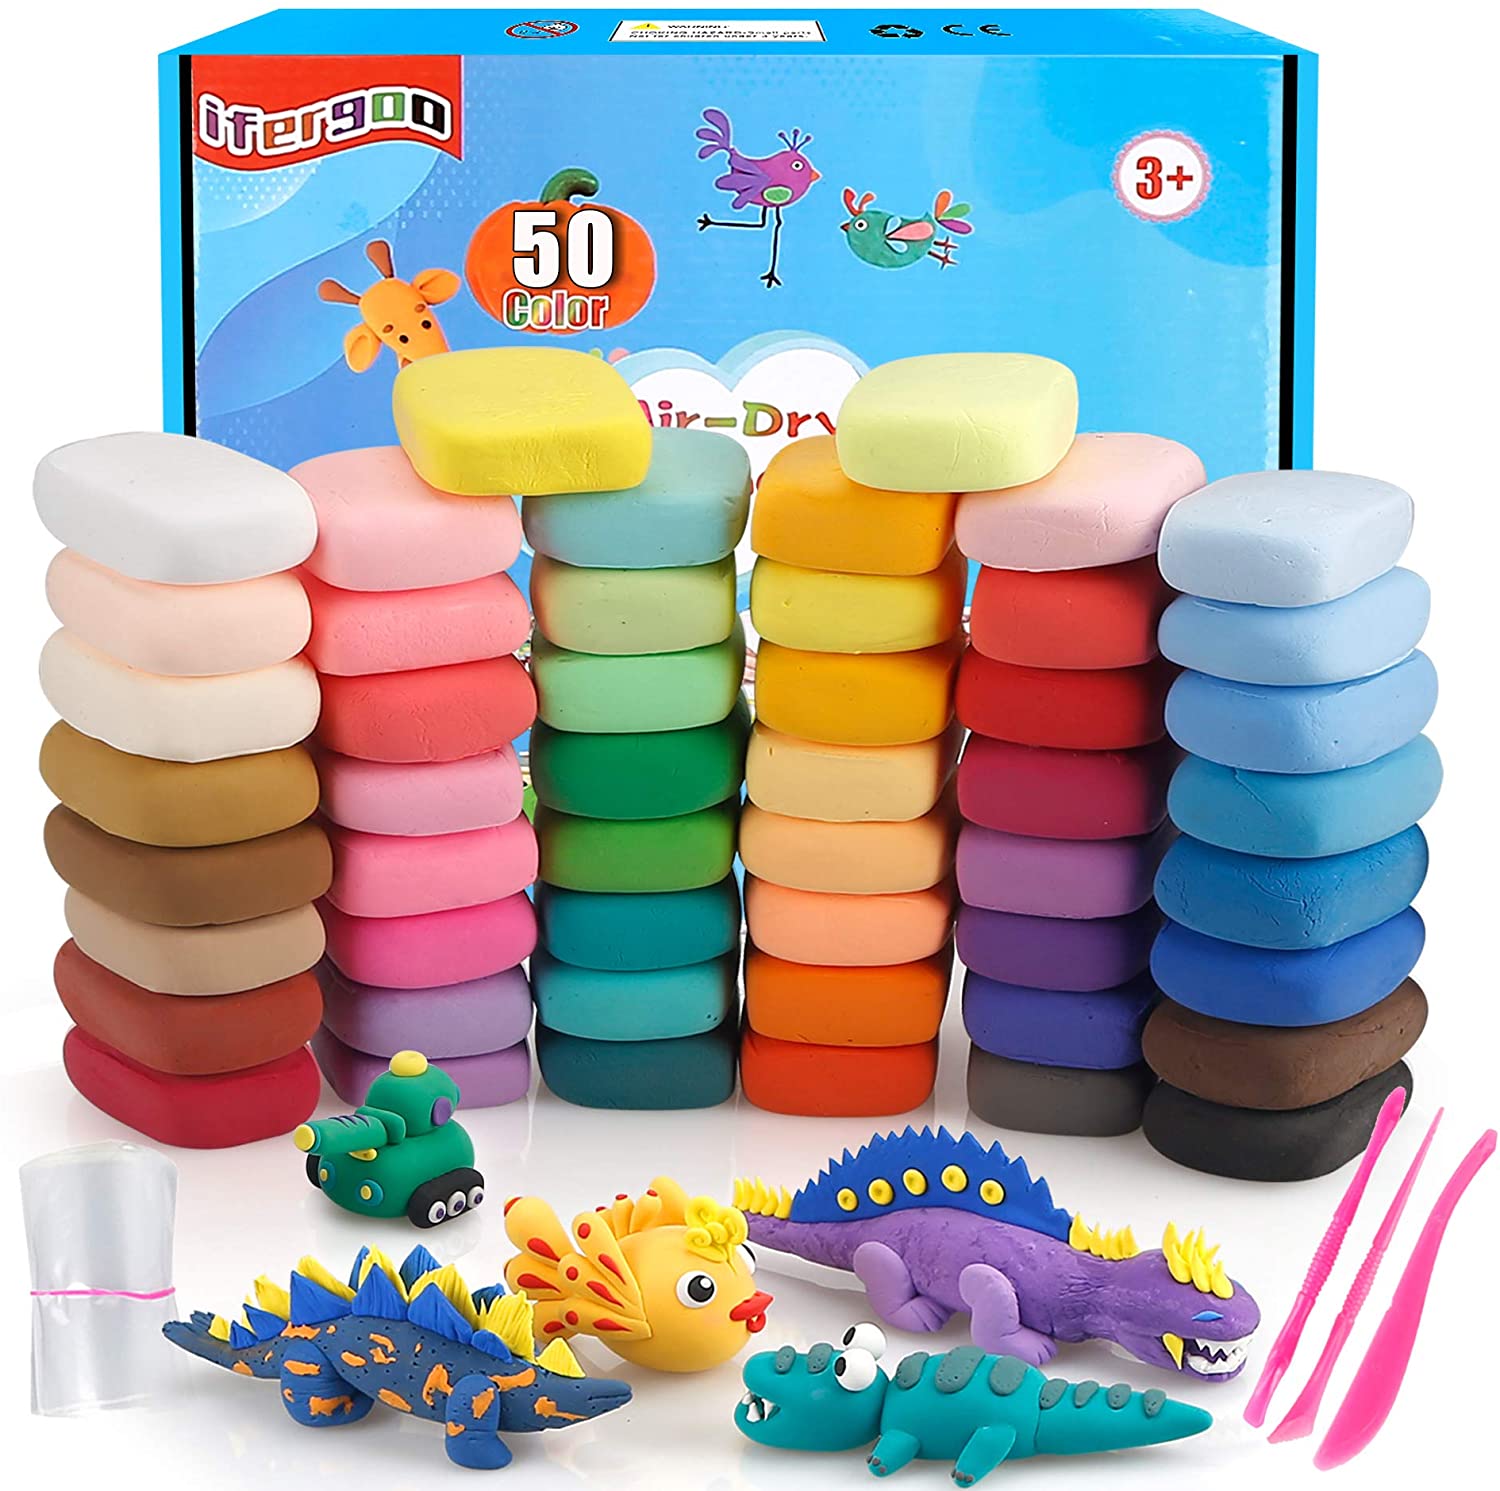 Slime Making Kit, DIY Clay Slime Set Toys, Colorful soft, Bath day